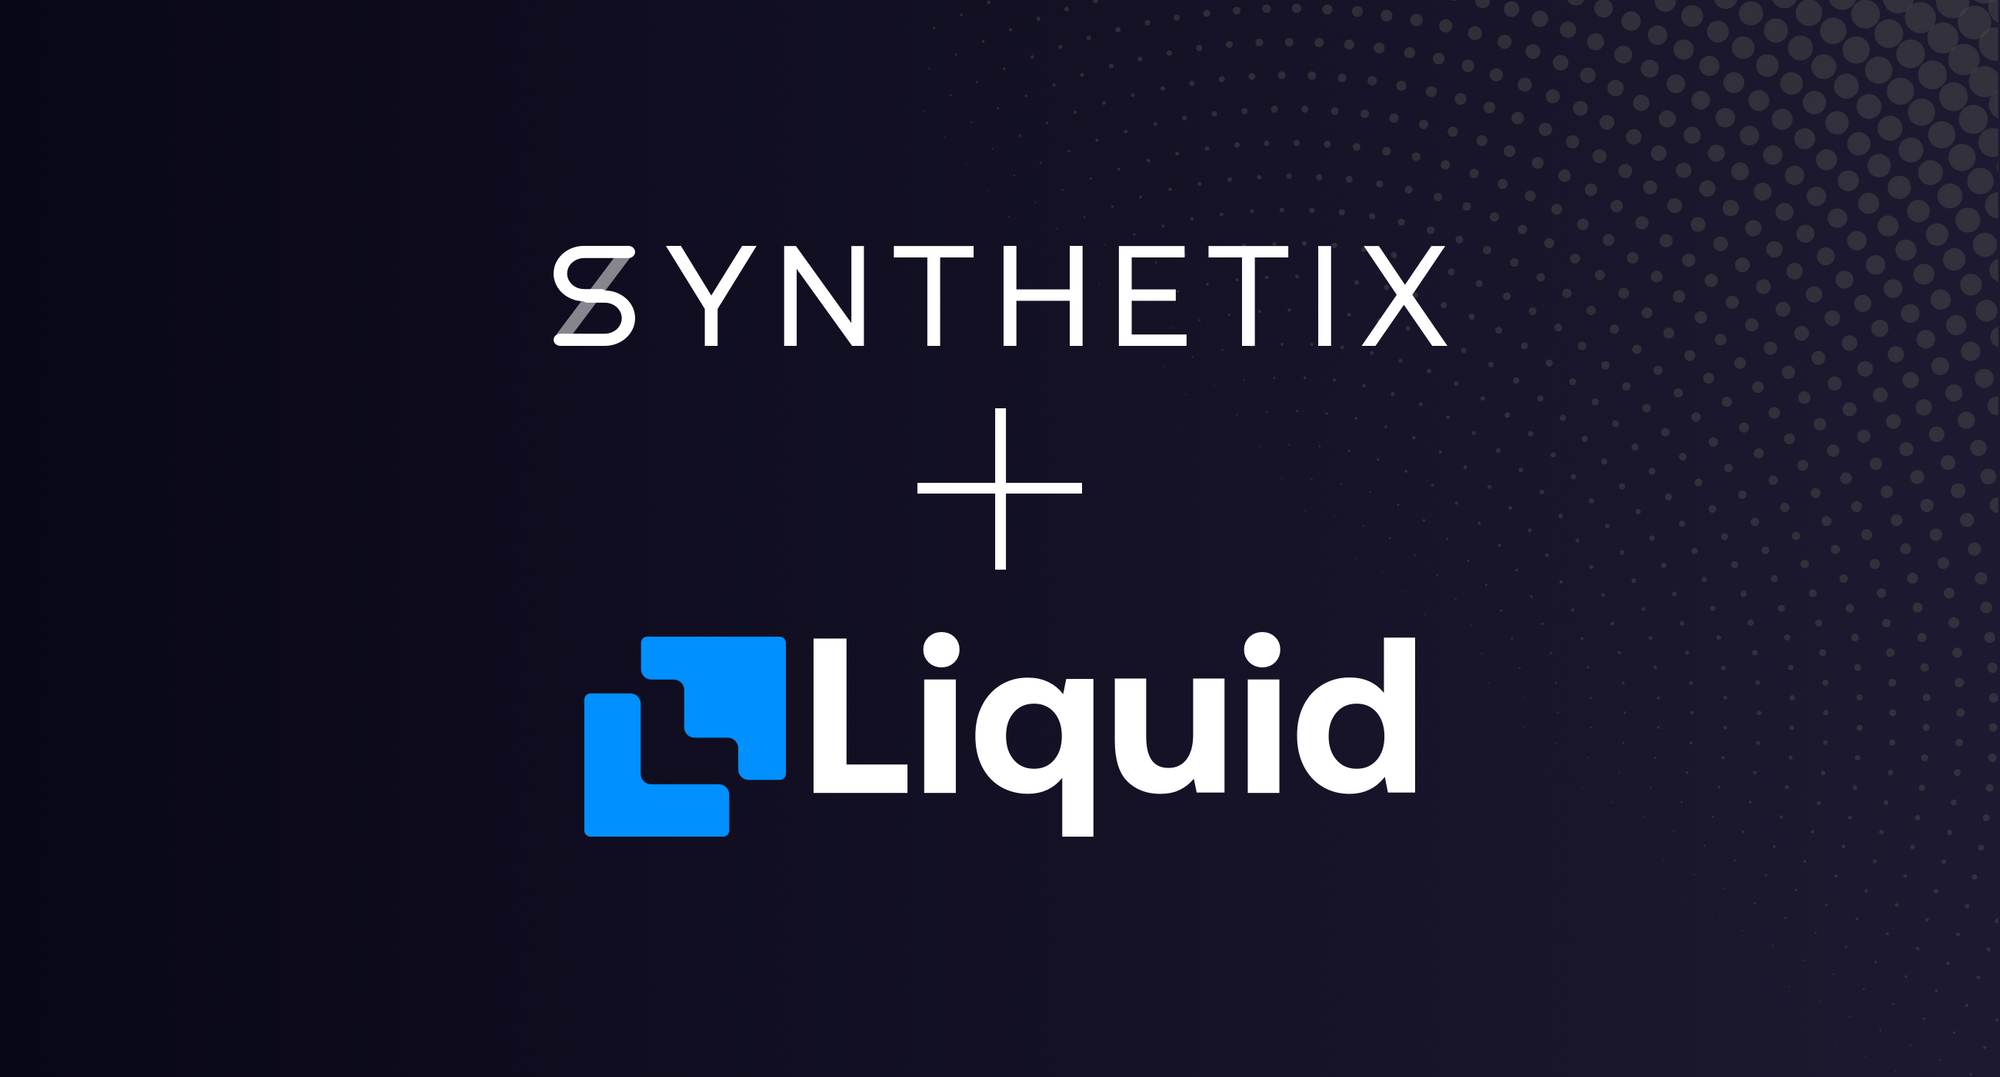 SNX can now be traded on Liquid again!